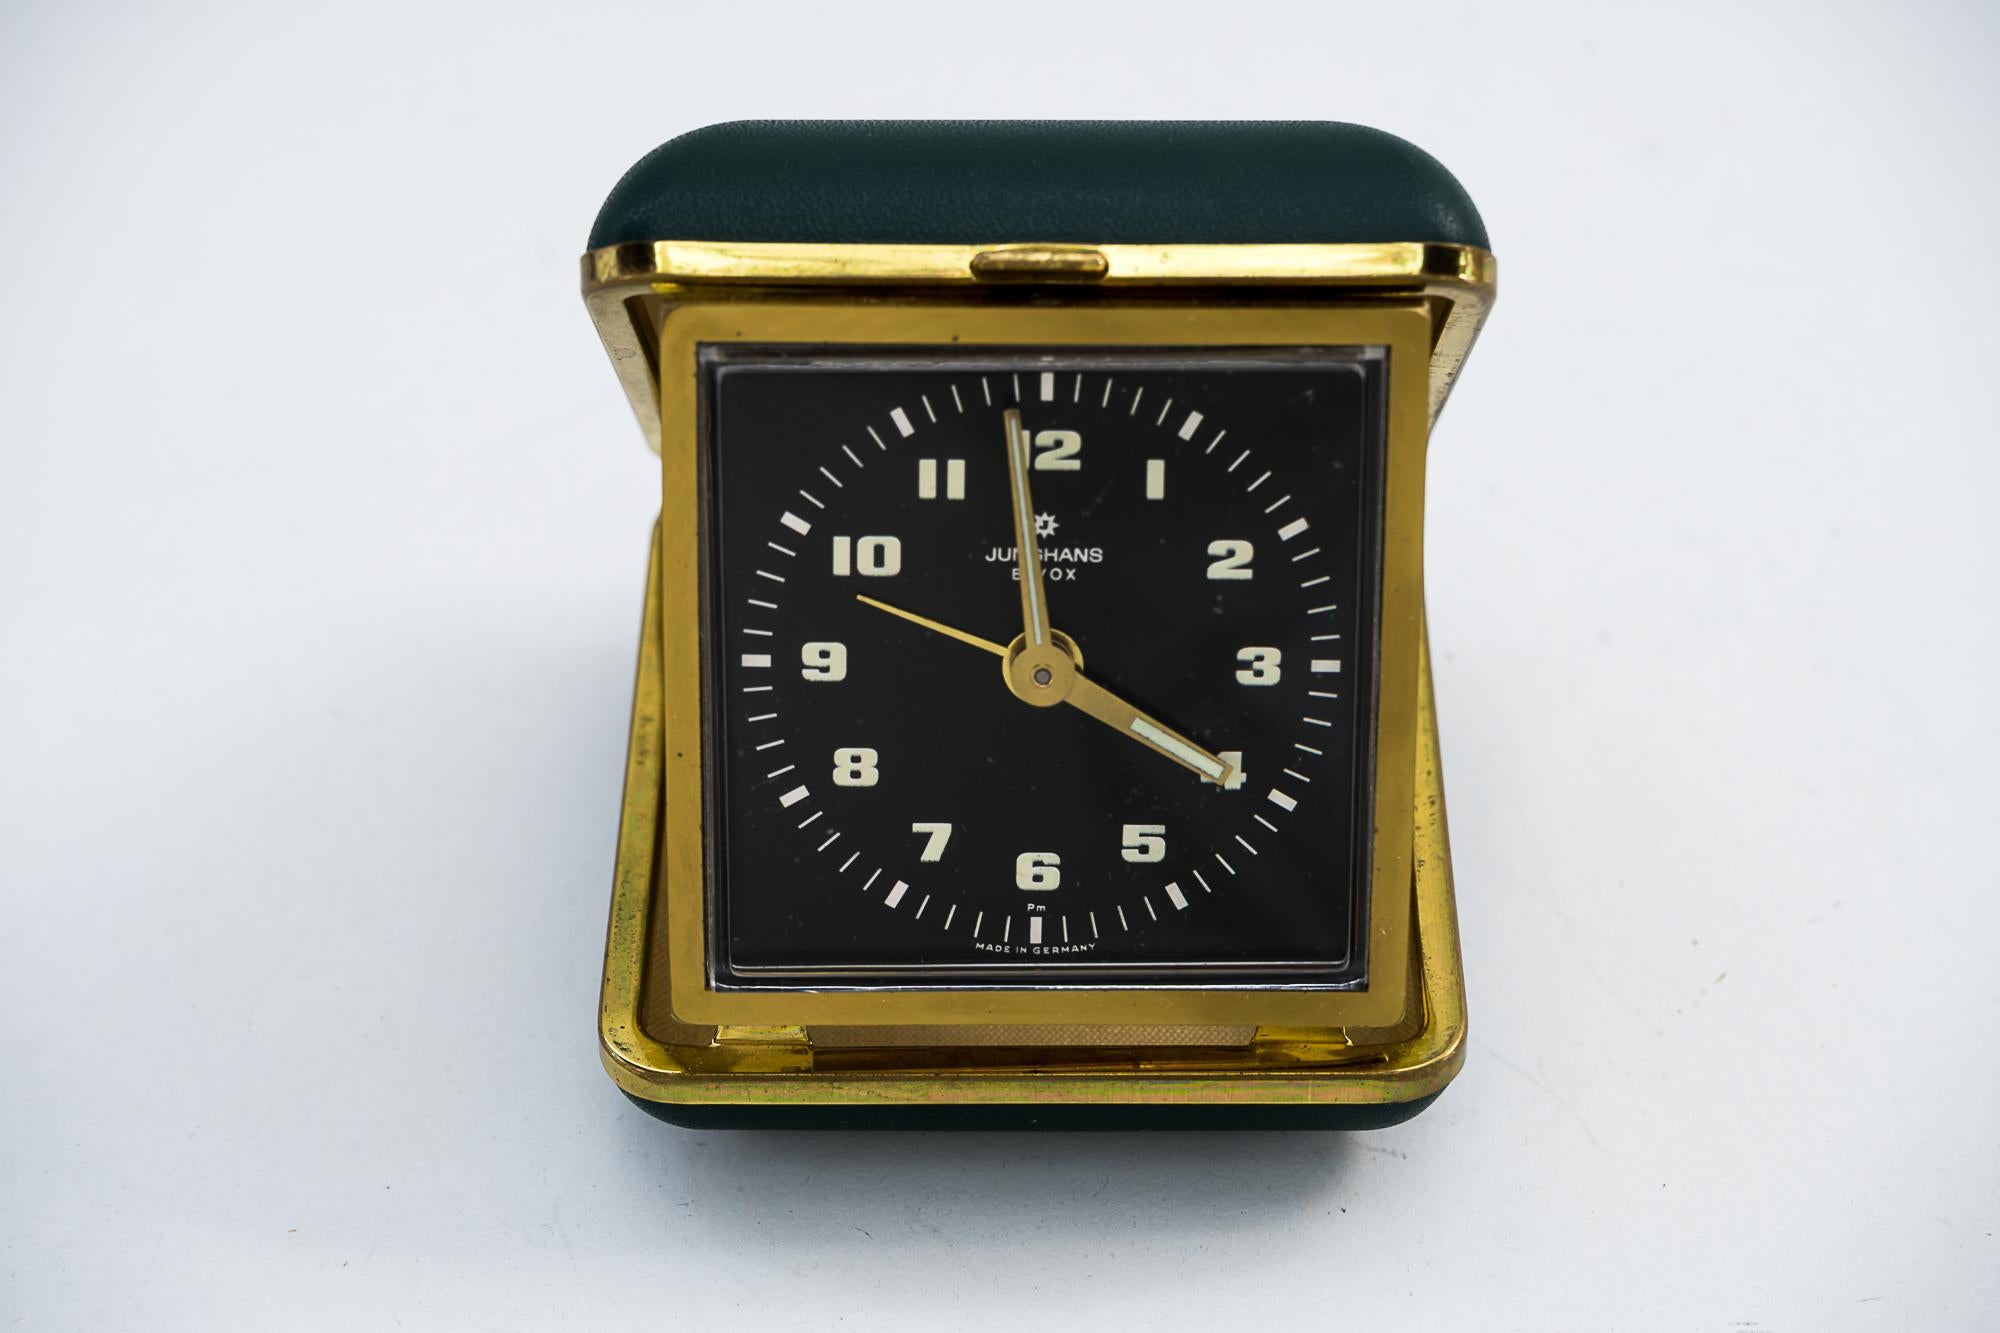 Travel alarm clock by Junghans, circa 1960s
Original condition
Brass with green faux leather cover
Still working
Measures: Open height 8cm, wide 7cm, deep 8cm
Closed height 3cm, wide 7cm, deep 8cm.